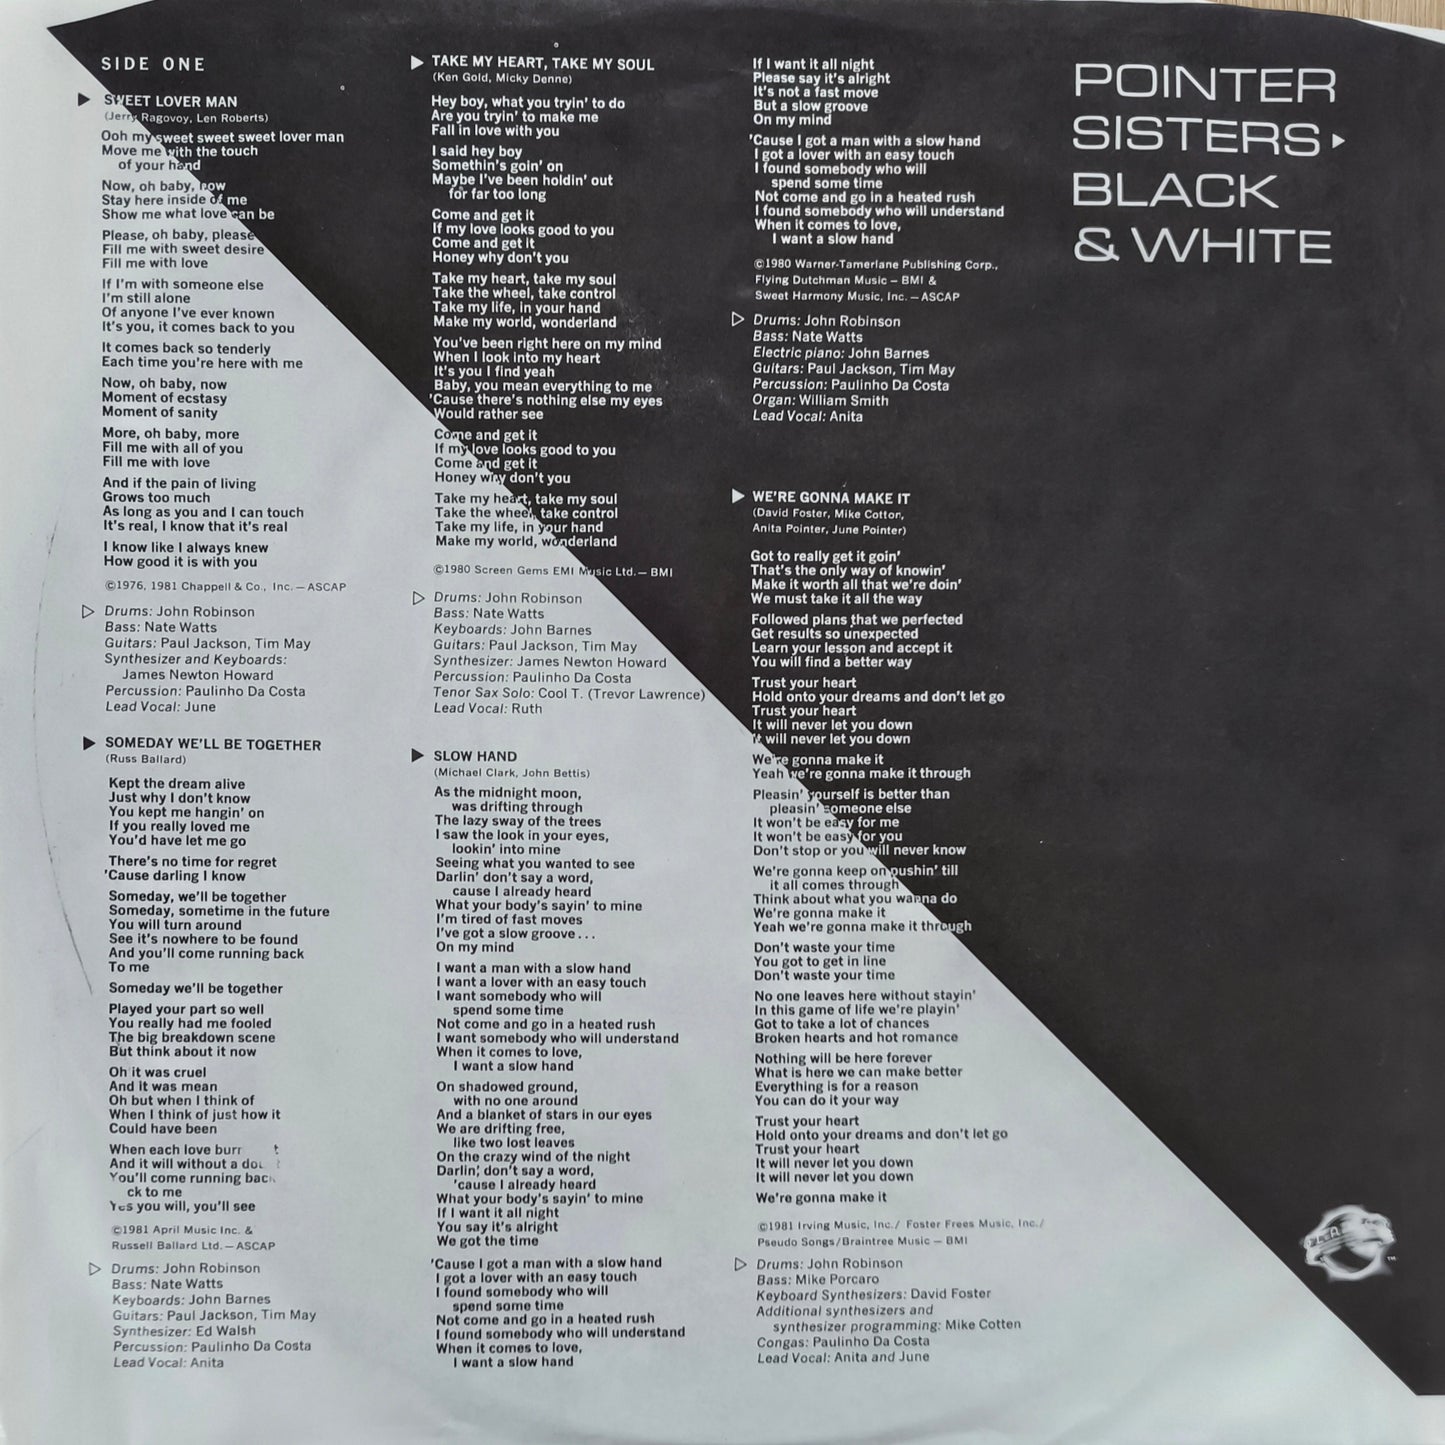 THE POINTER SISTERS - Black & White